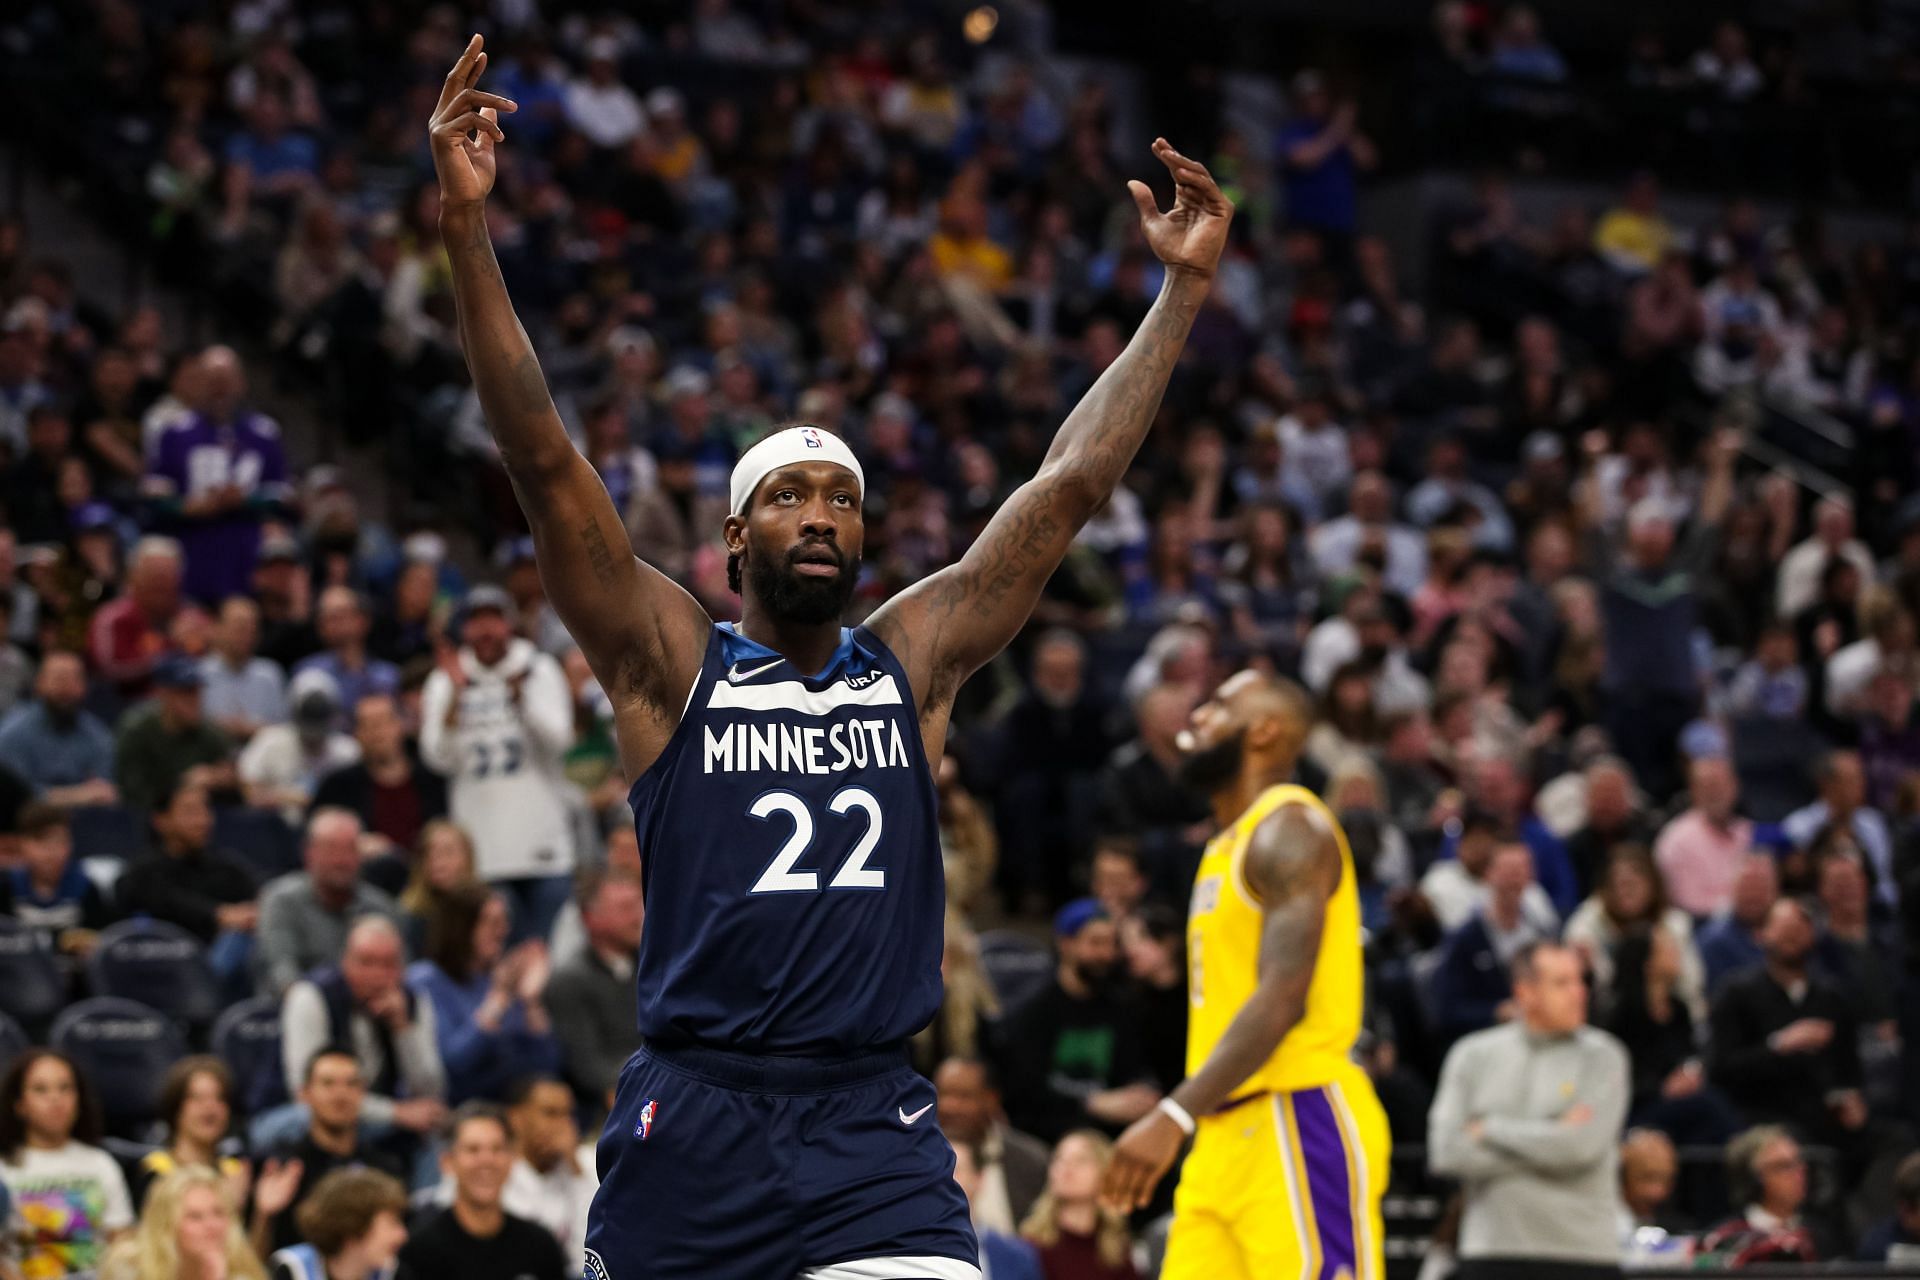 Patrick Beverley of the Minnesota Timberwolves celebrates after Anthony Edwards drew a foul while LeBron James of the LA Lakers reacts in the second quarter Wednesday in Minneapolis, Minnesota.